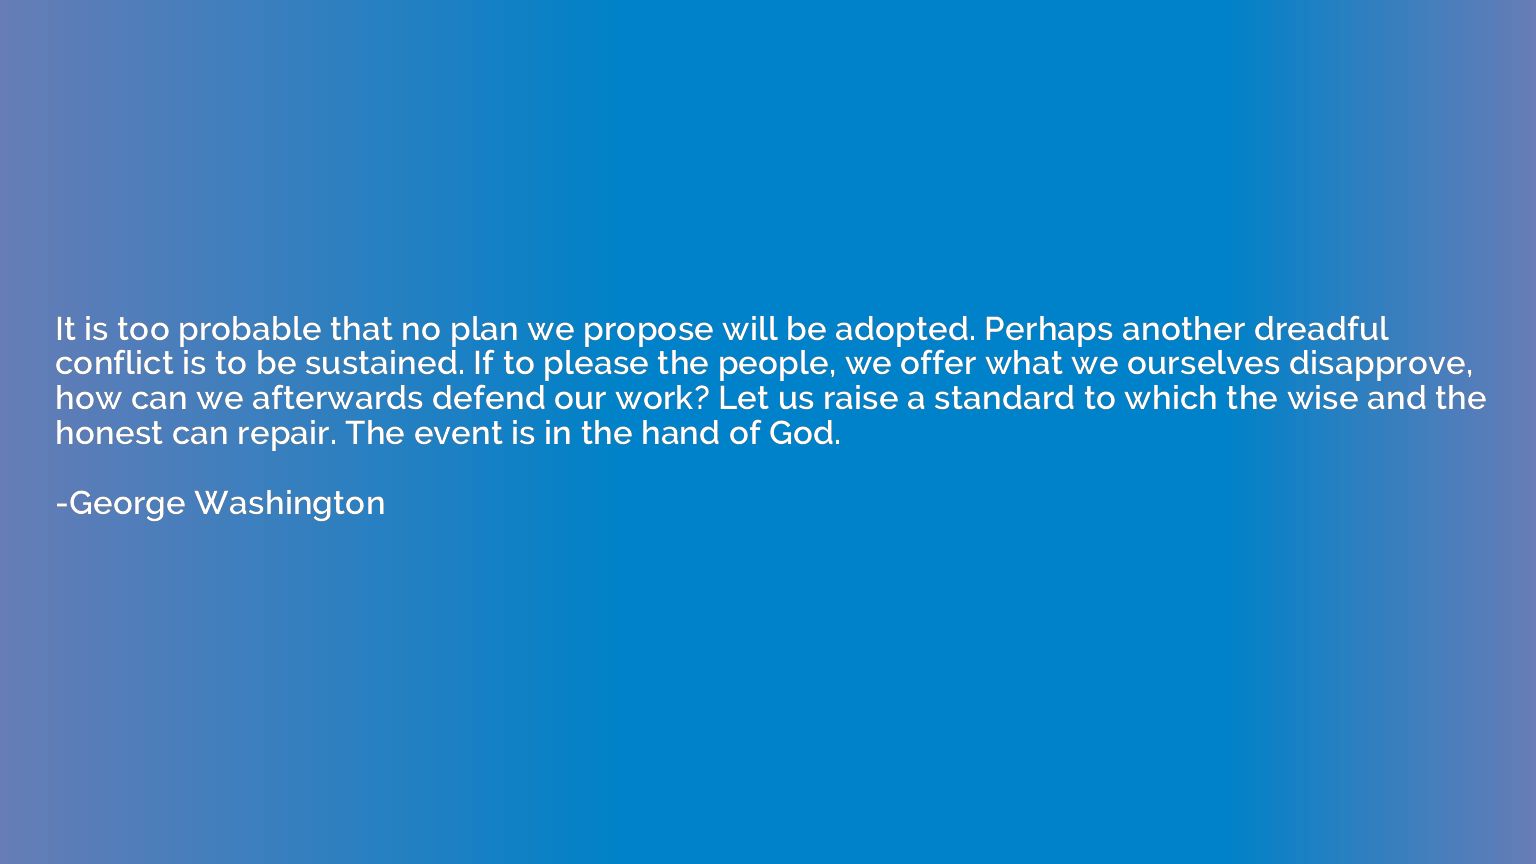 It is too probable that no plan we propose will be adopted. 